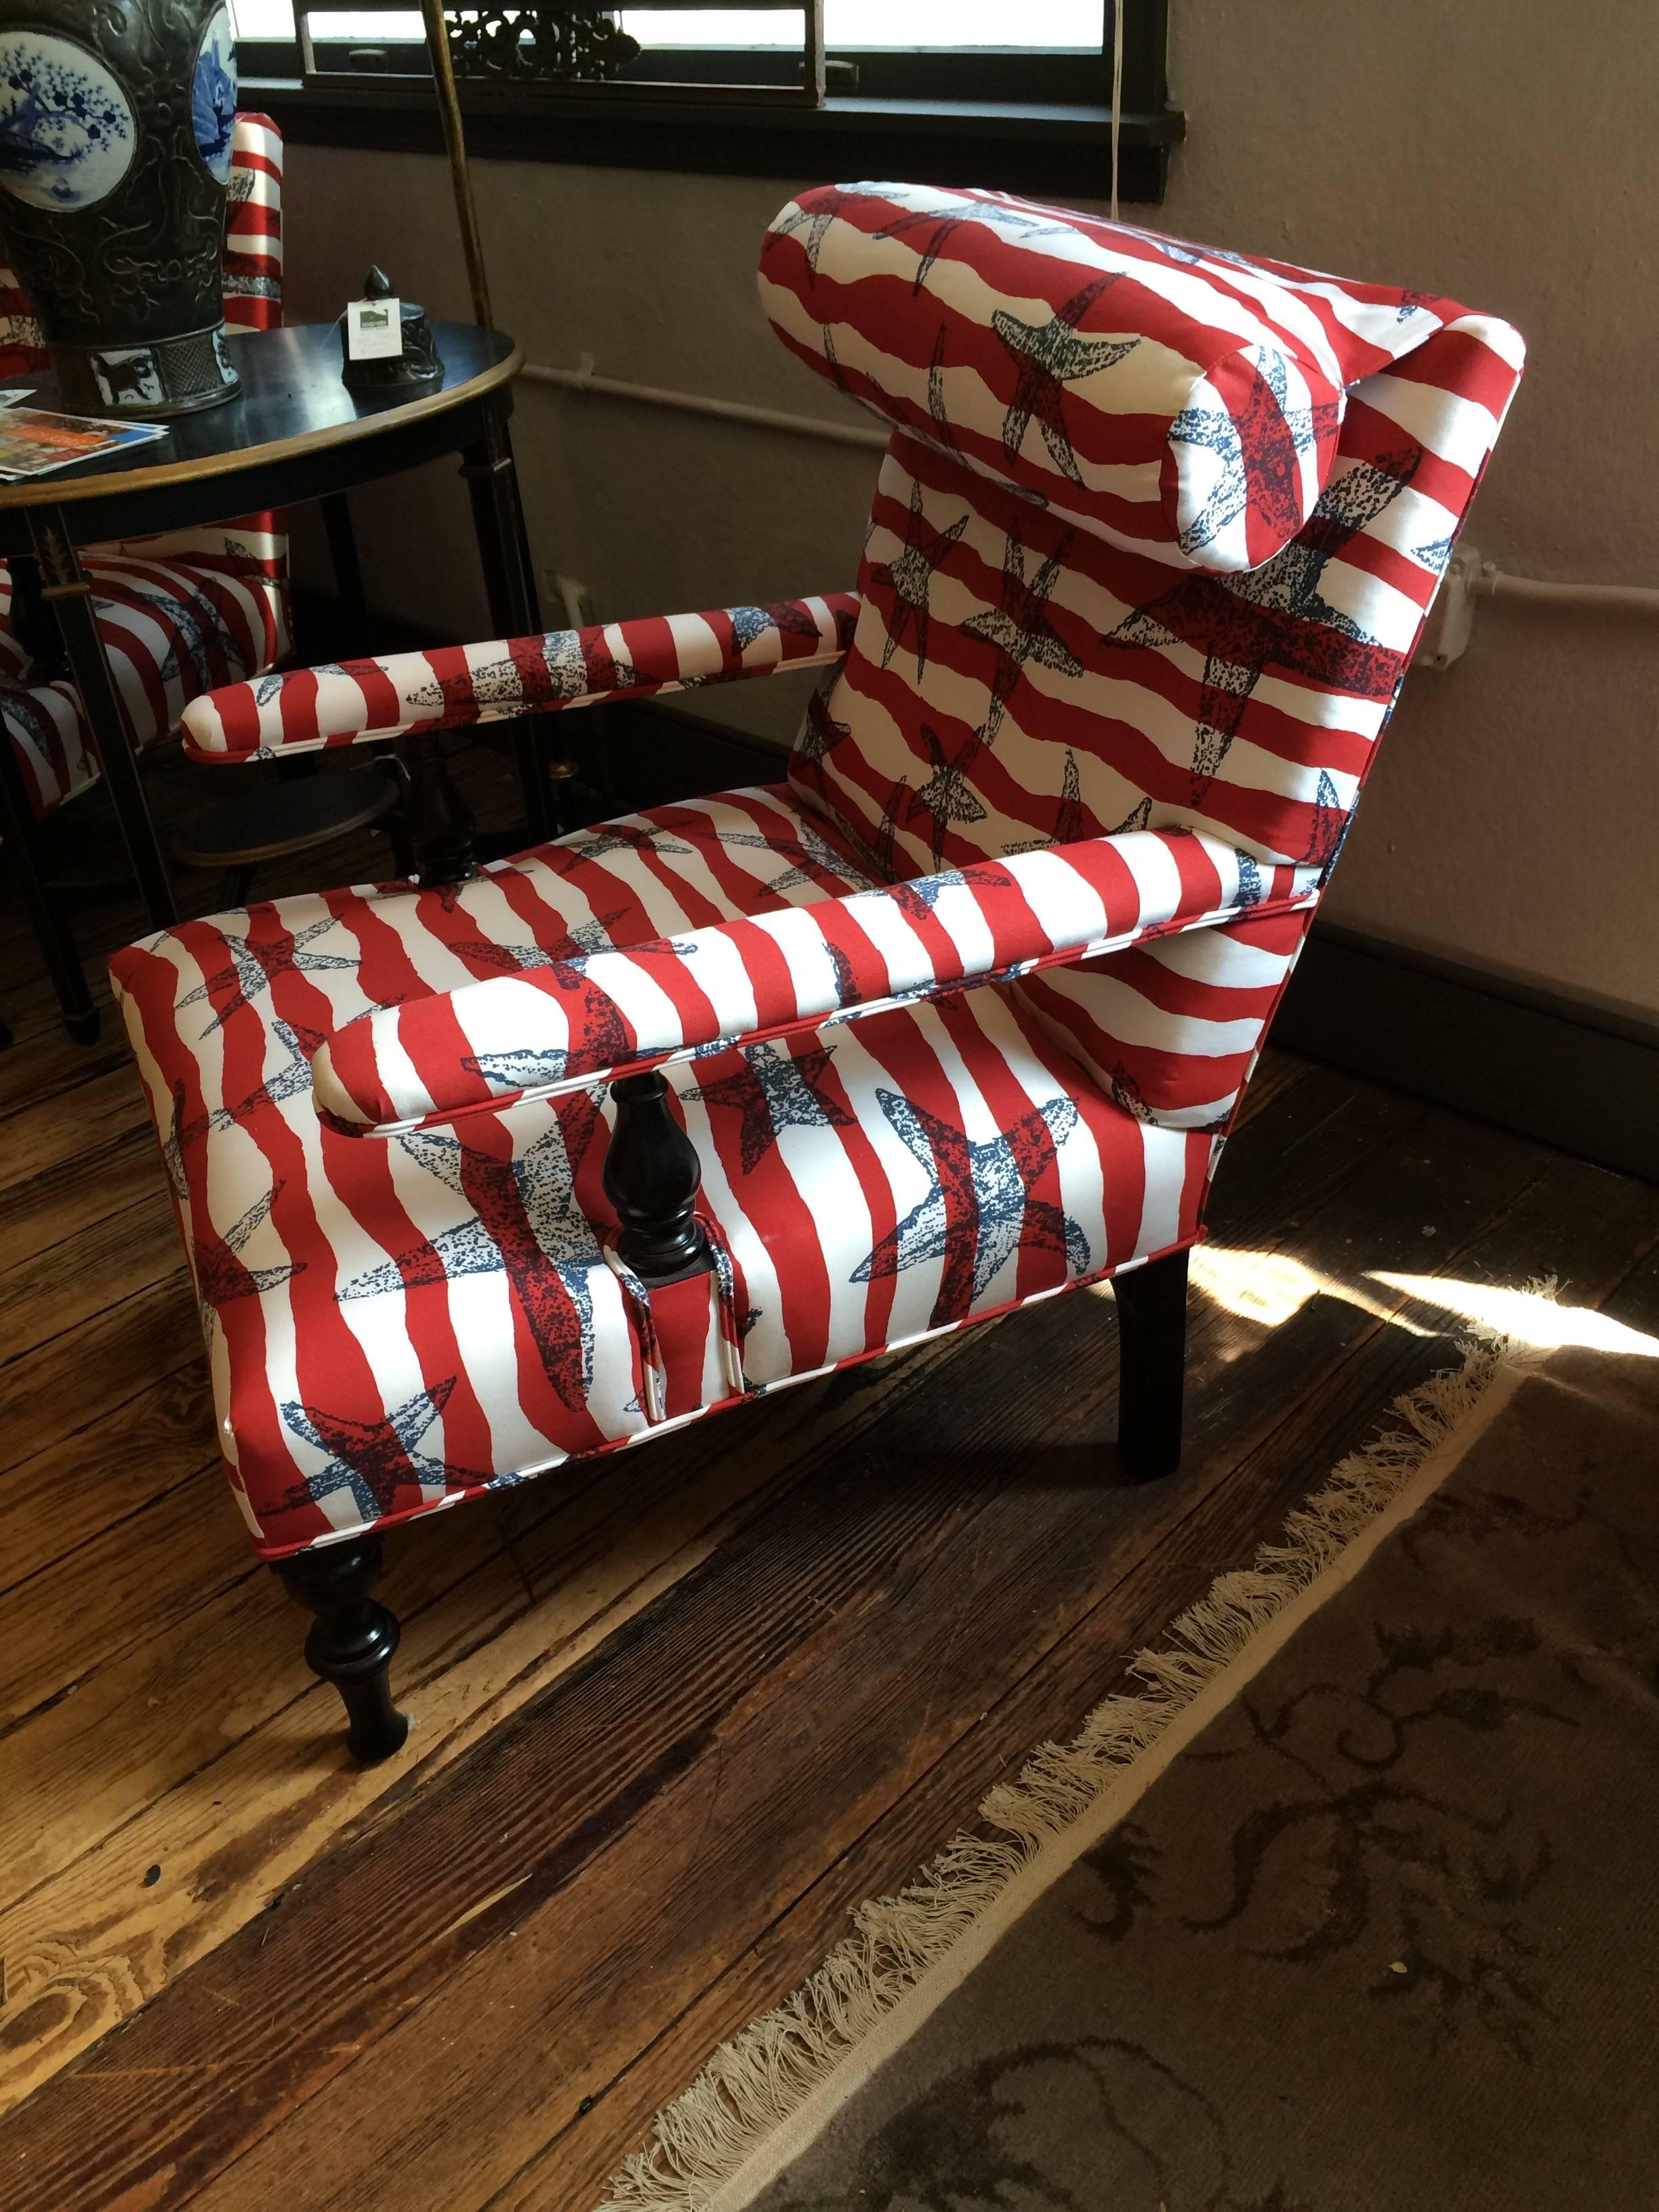 Sensational pair of large low slung club chairs having mahogany turned legs, imaginatively upholstered in patriotic hand screened Tillett fabric on the front and solid red on the back. Fun round pillows attached at the head rest for a flashy